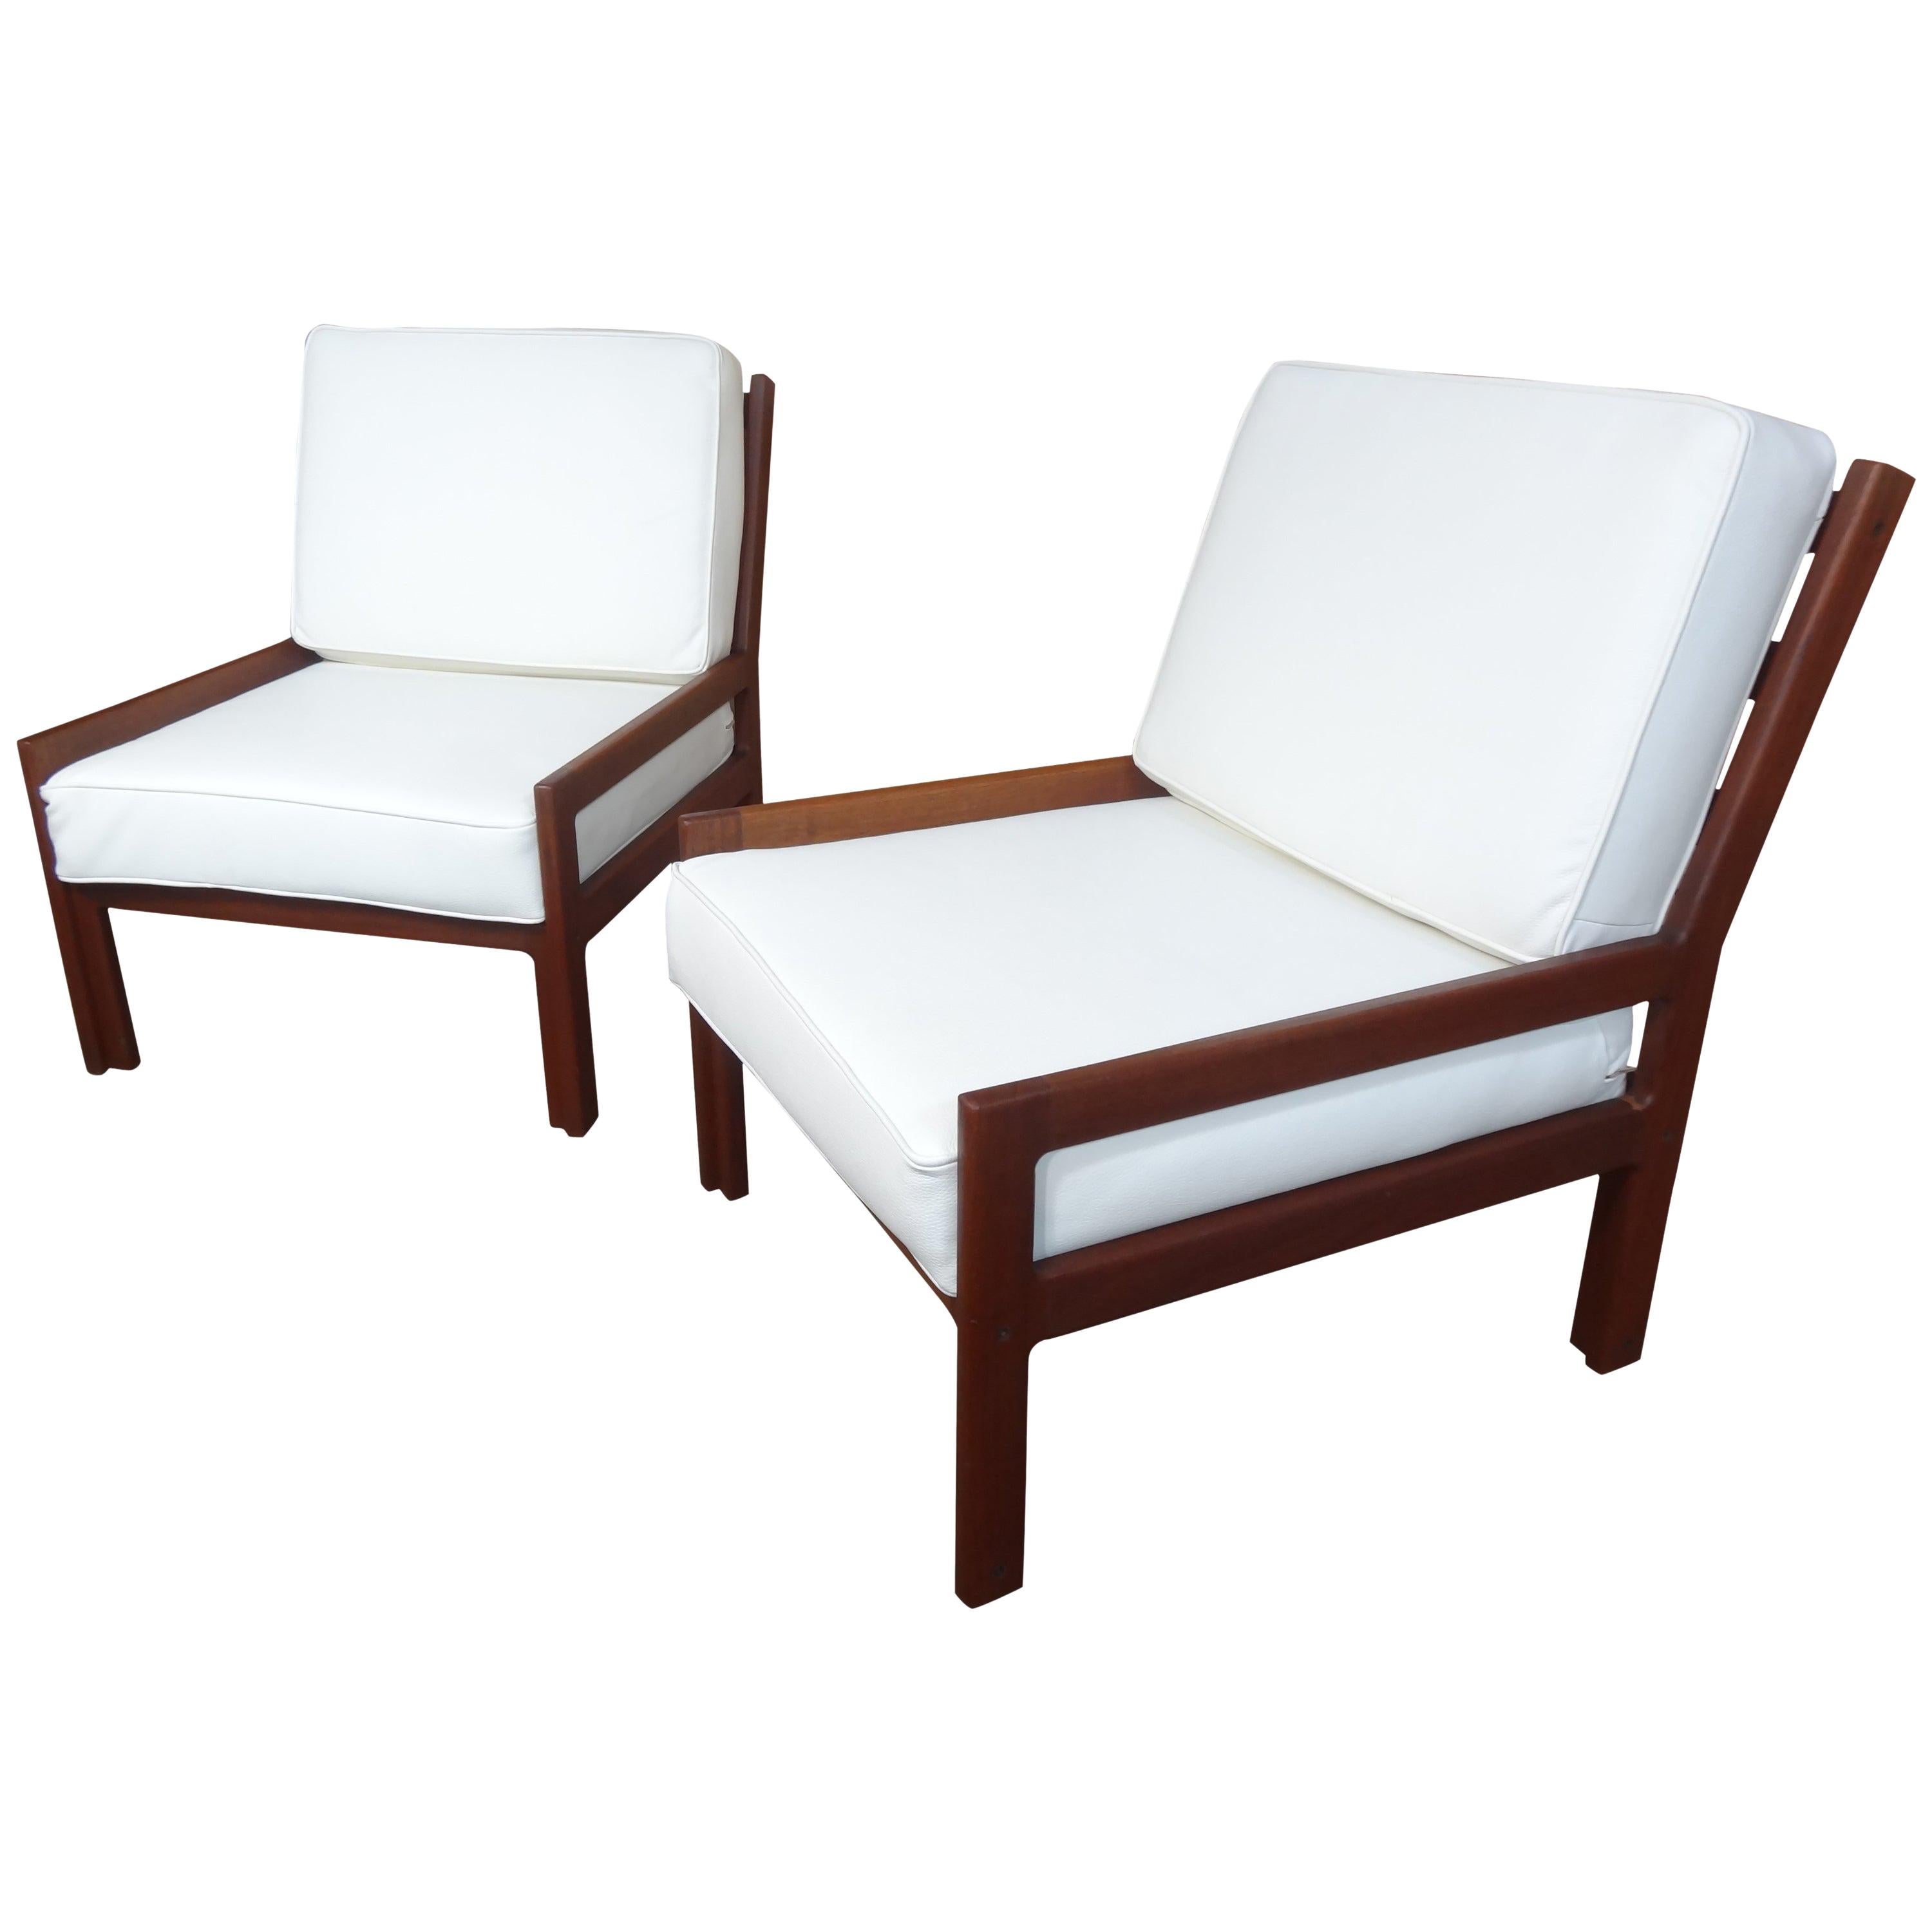 1960 Set of Retro White Leather Minimalistic Teak Lounge Chairs For Sale